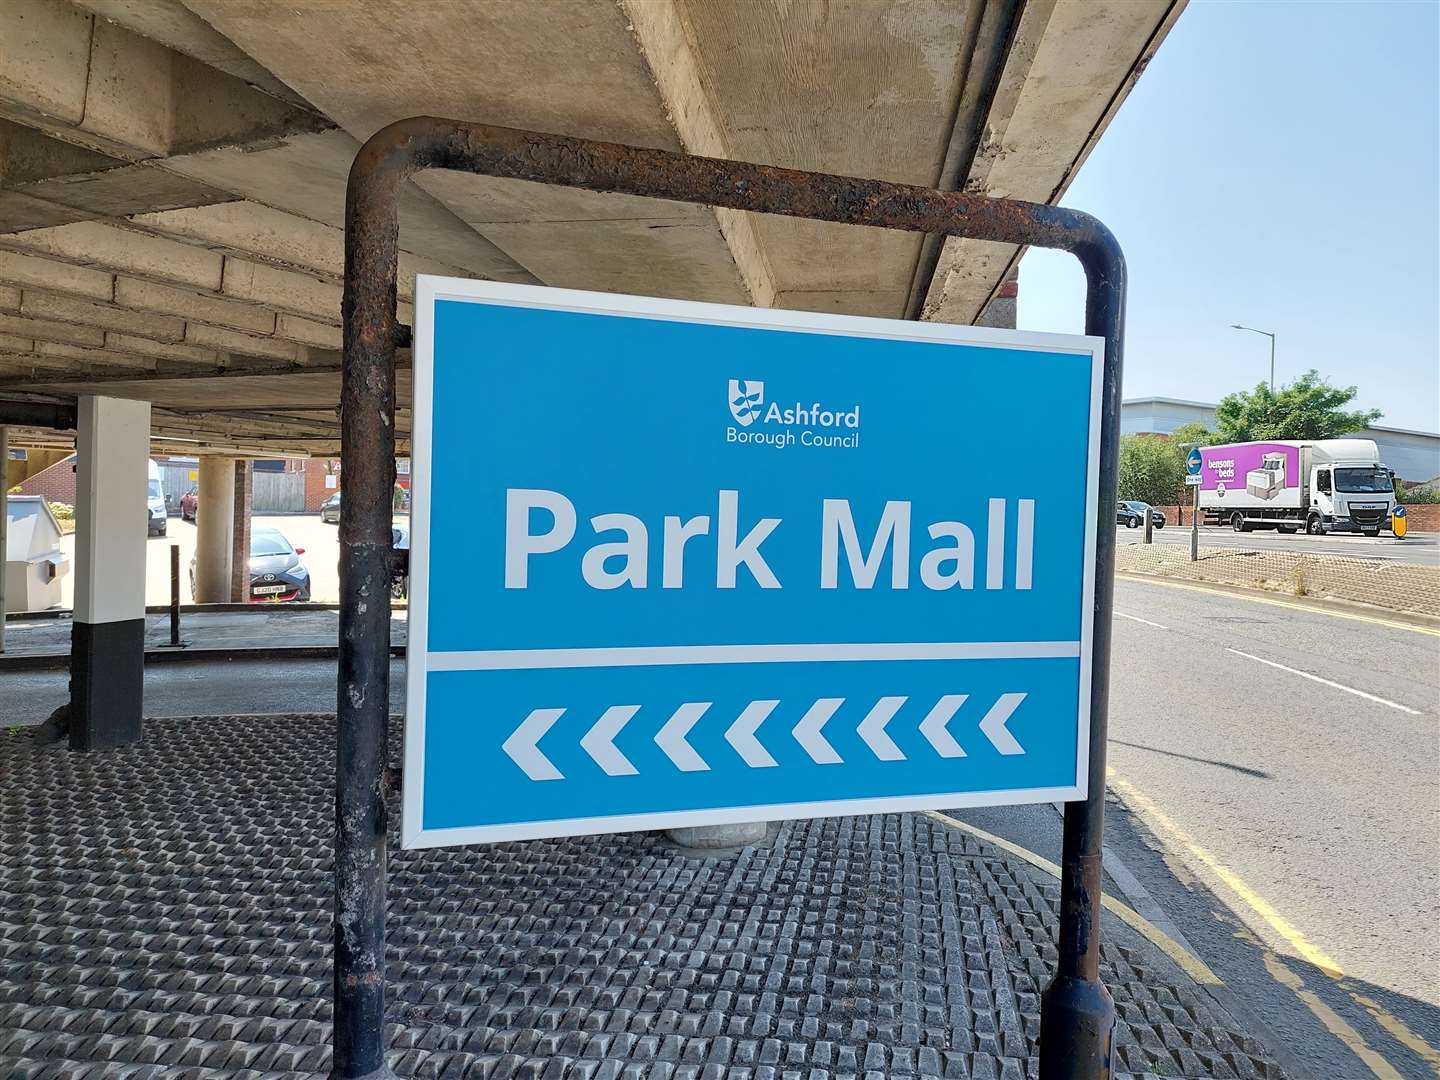 Park Mall car park reopened in the summer but the top floor remains out of bounds